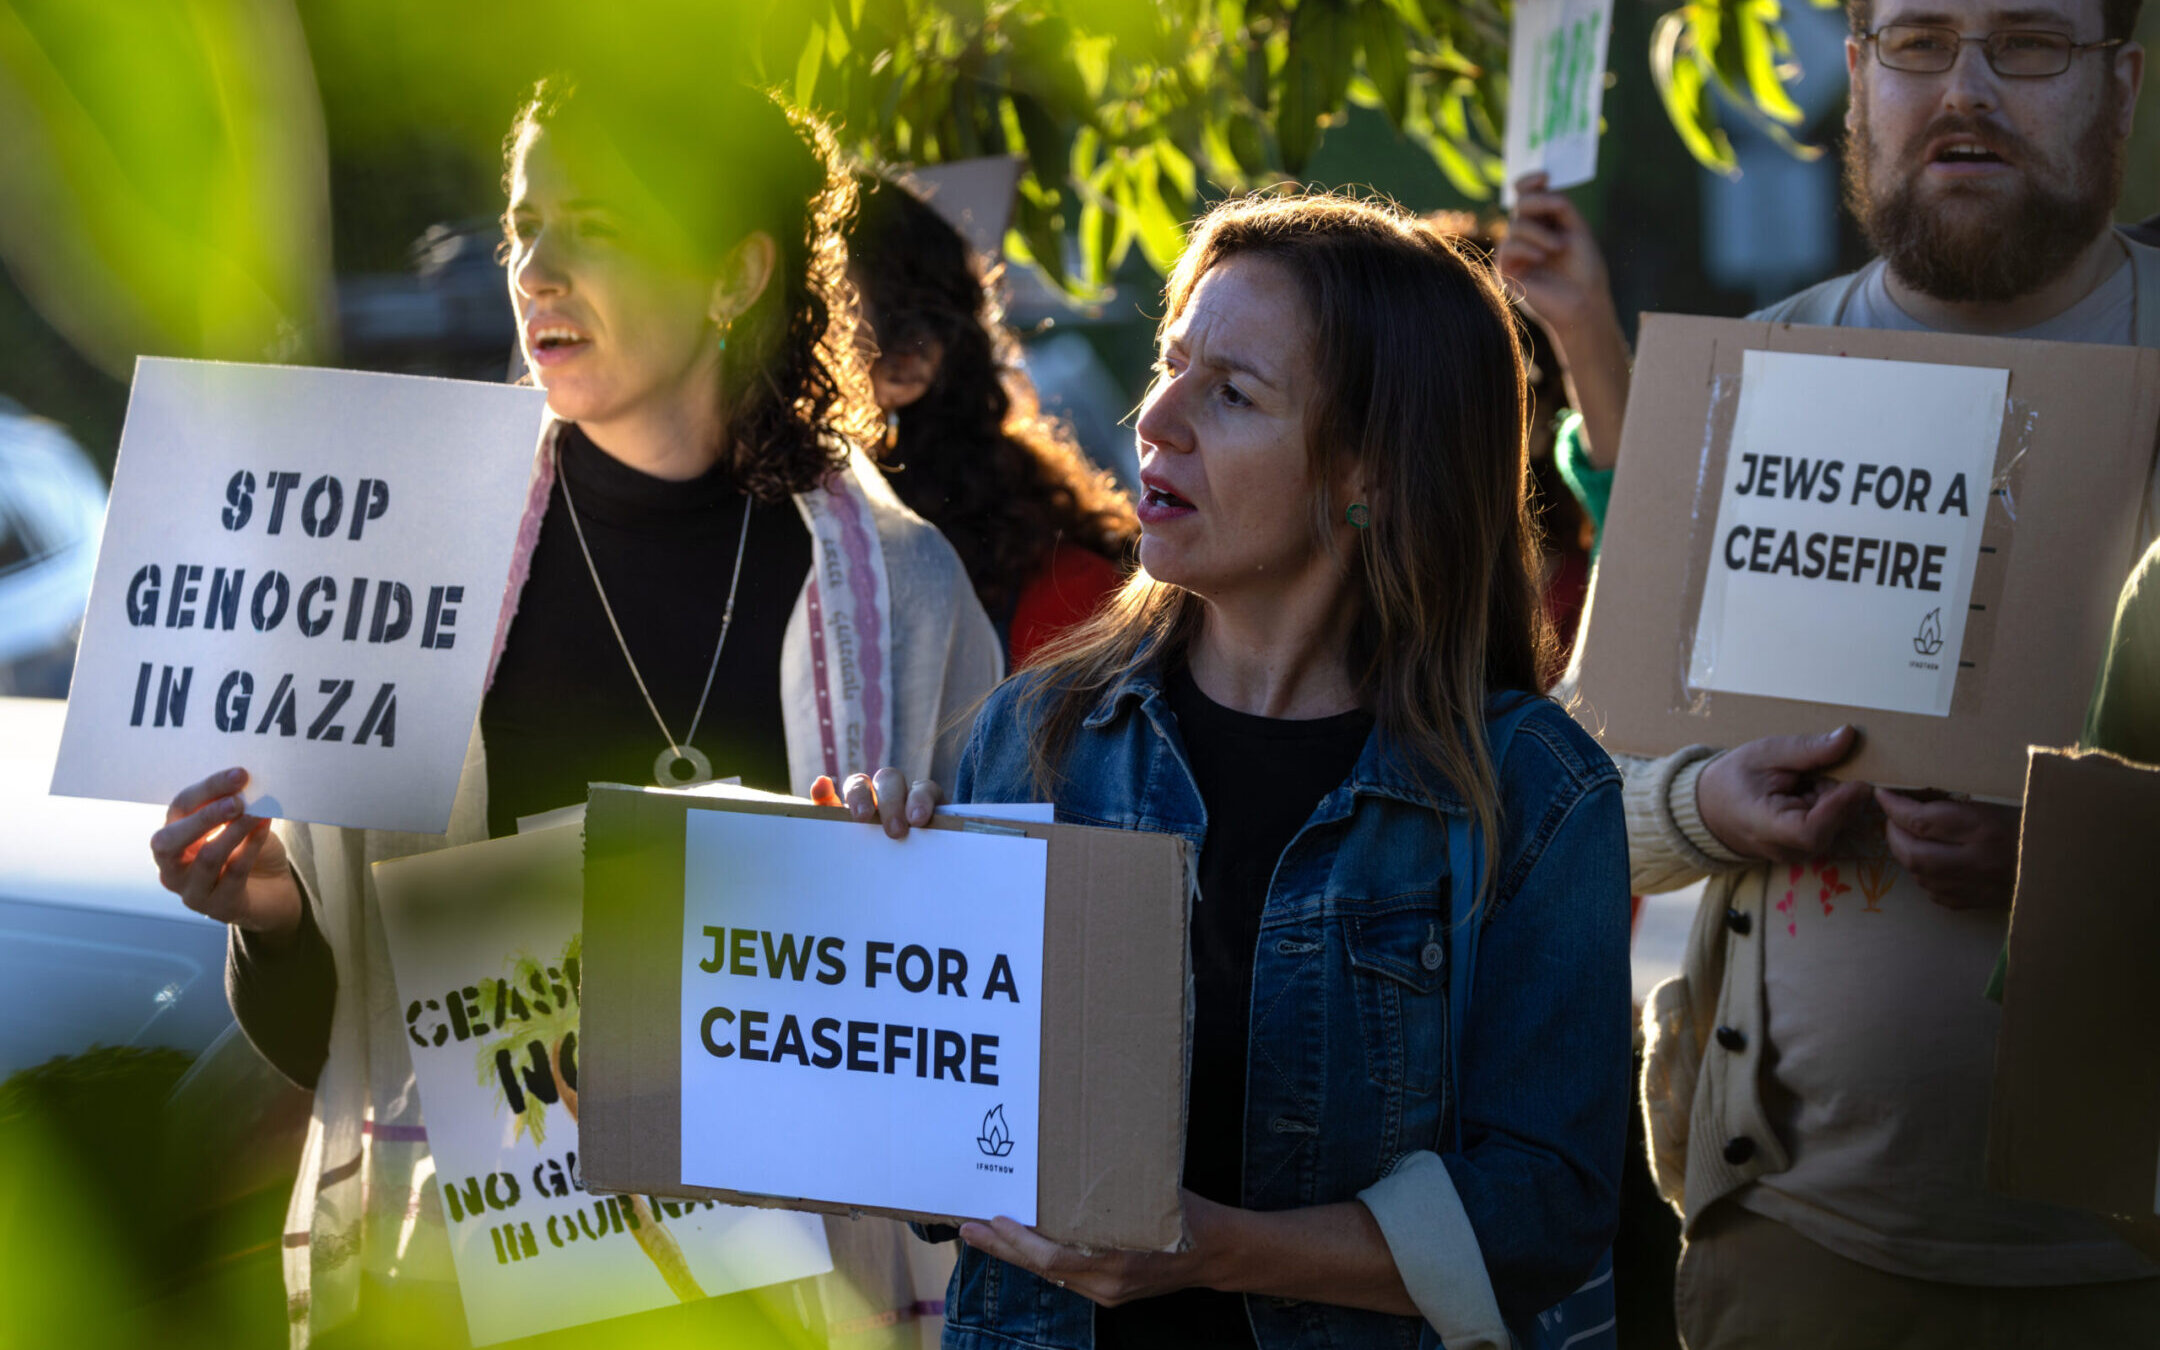 Members of the advocacy group IfNotNow sing during a protest outside the Los Angeles home of Vice President Kamala Harris calling “on those in power to oppose any policies that privilege one group of people over another, in Israel/Palestine and in the U.S,” Oct. 19, 2023. (Irfan Khan / Los Angeles Times via Getty Images)